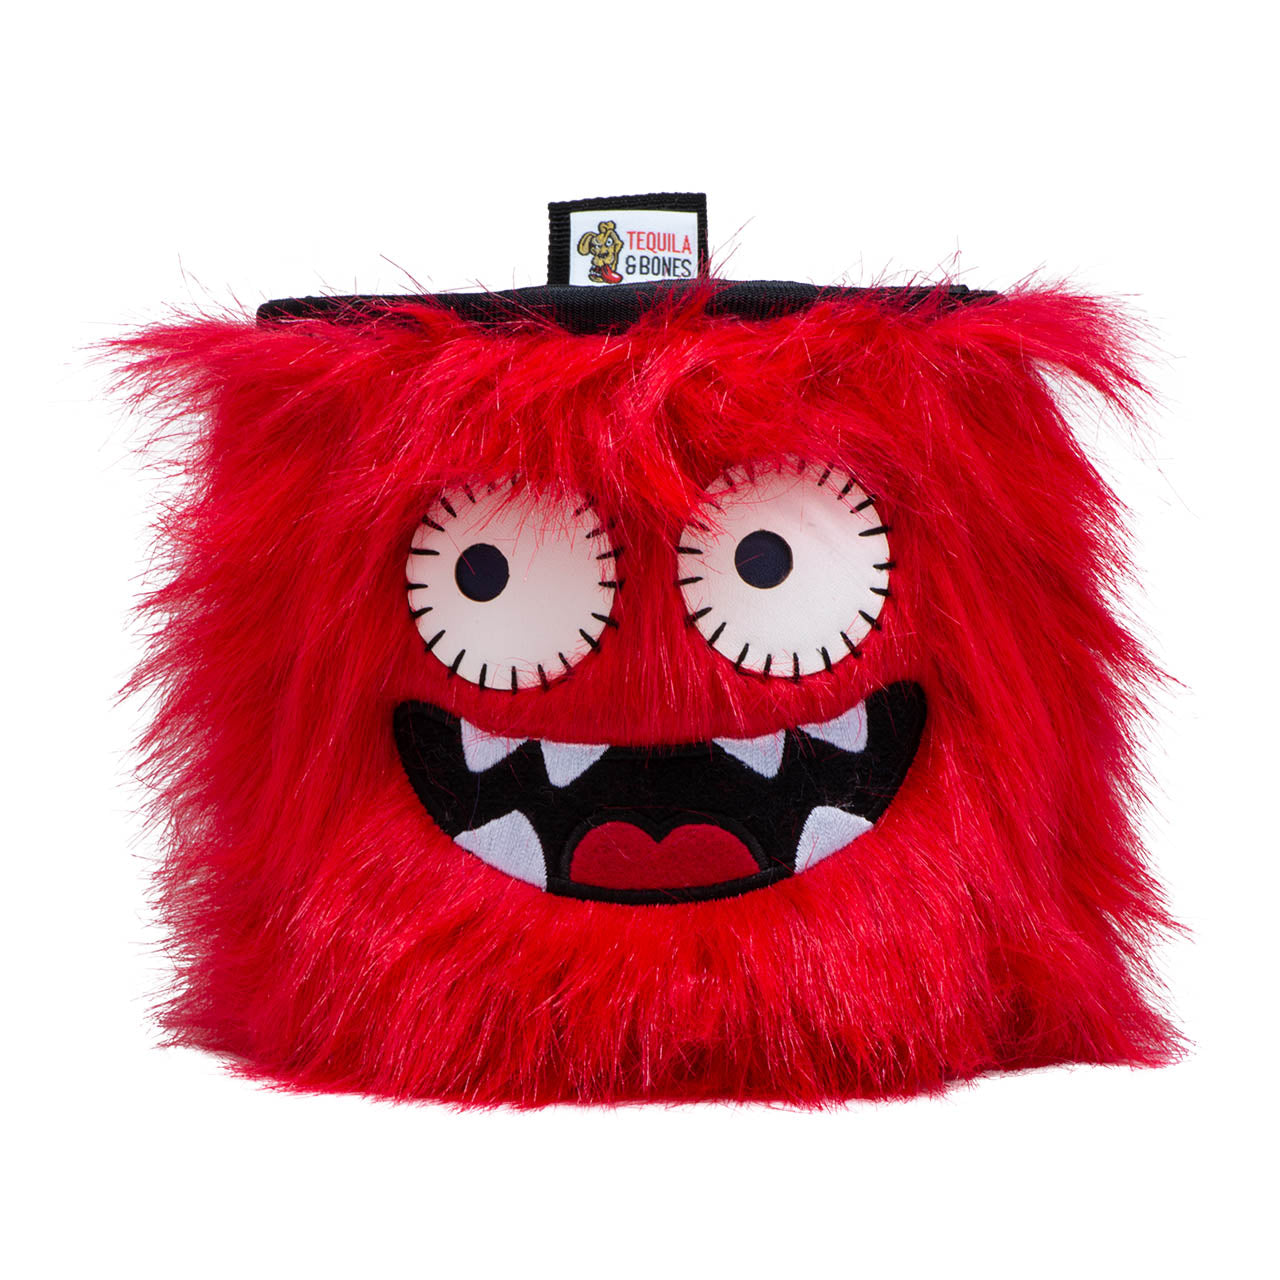 Green Five Toothed Monster Chalk Bag